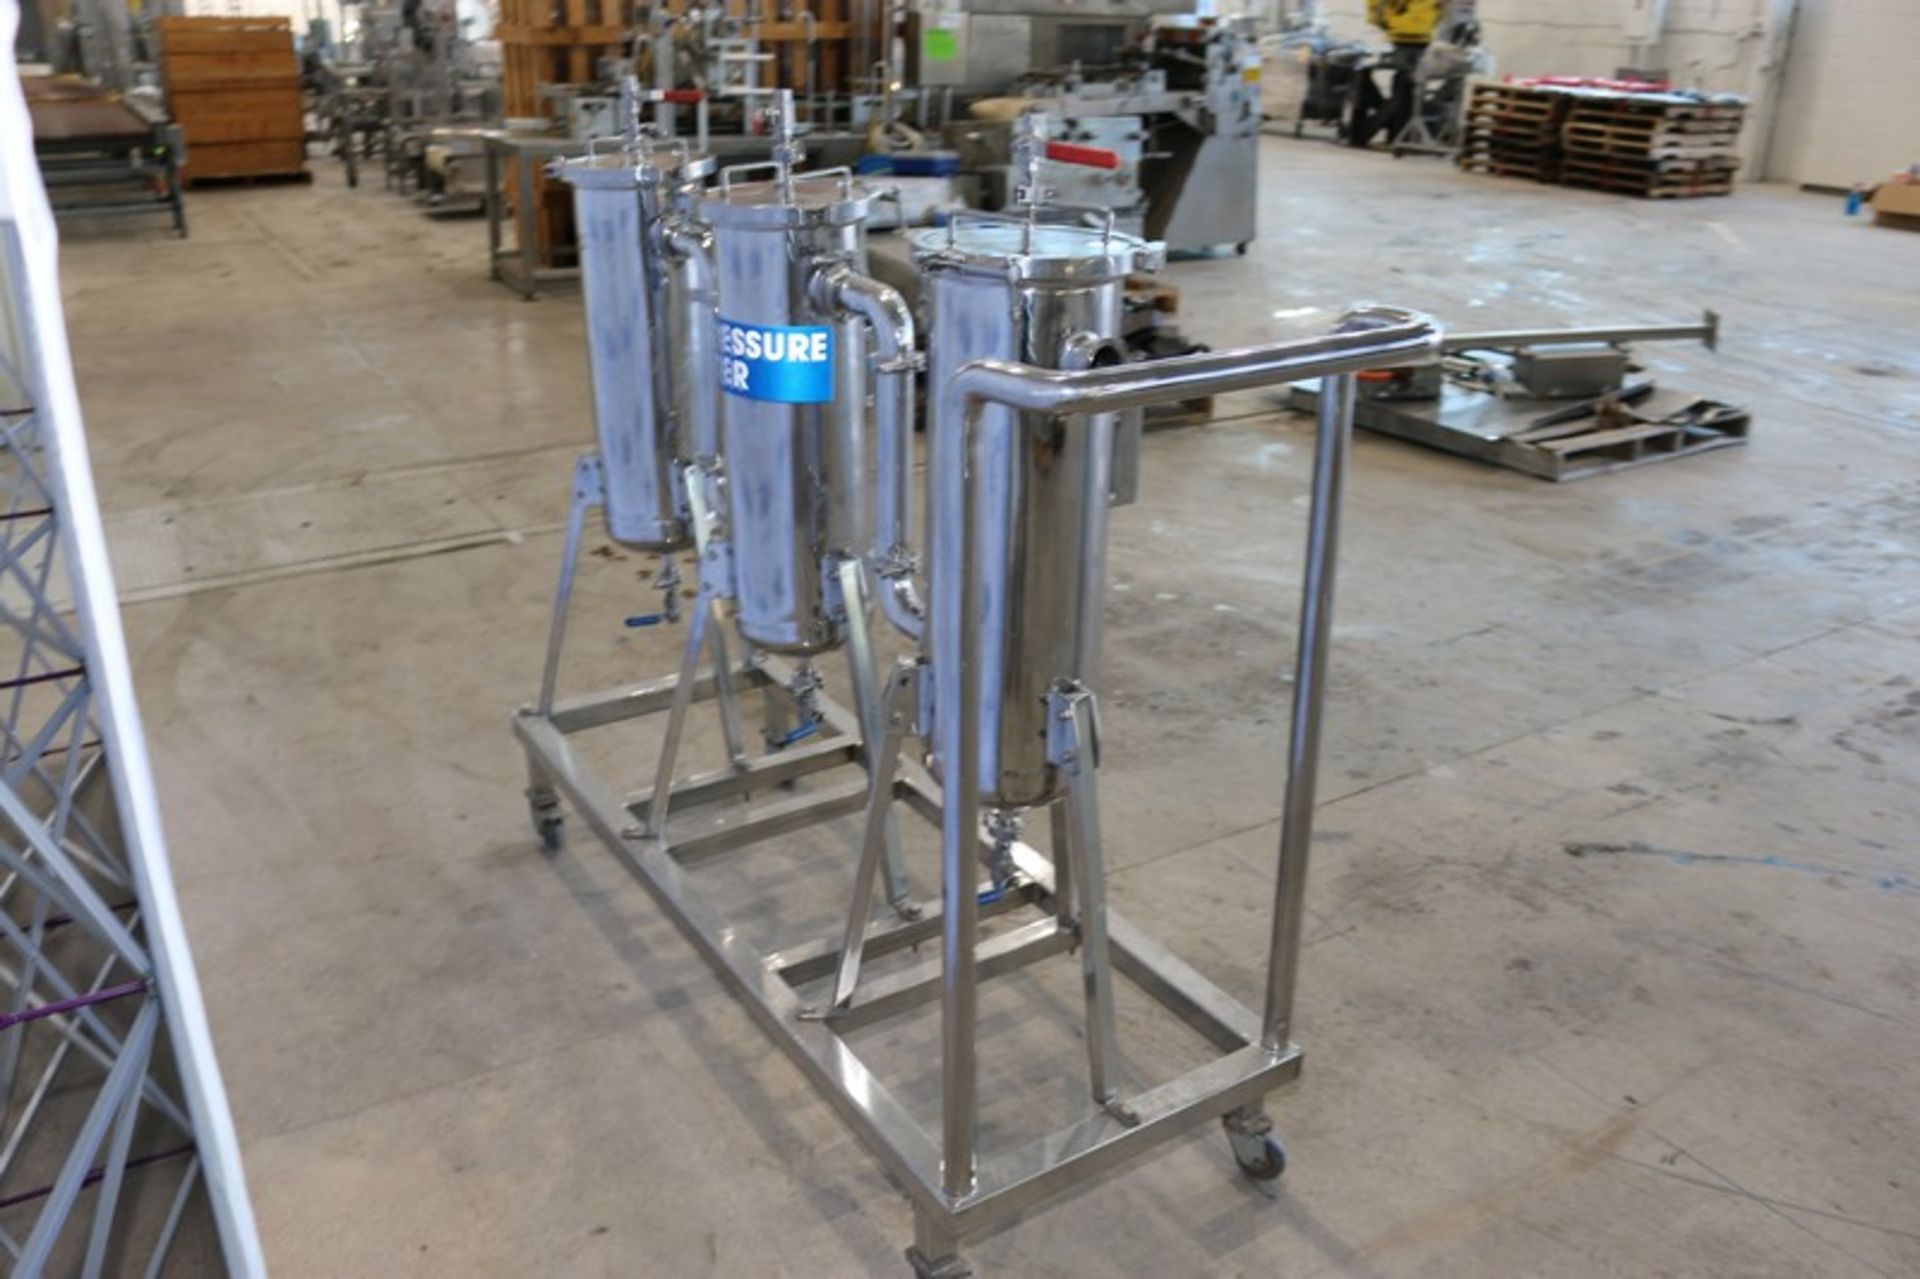 (3) 2013-2014 ABC S/S GHEE Filters, 5,000 Liter Capacity, Mounted on Portable S/S Skid(INV#80064)( - Image 6 of 6